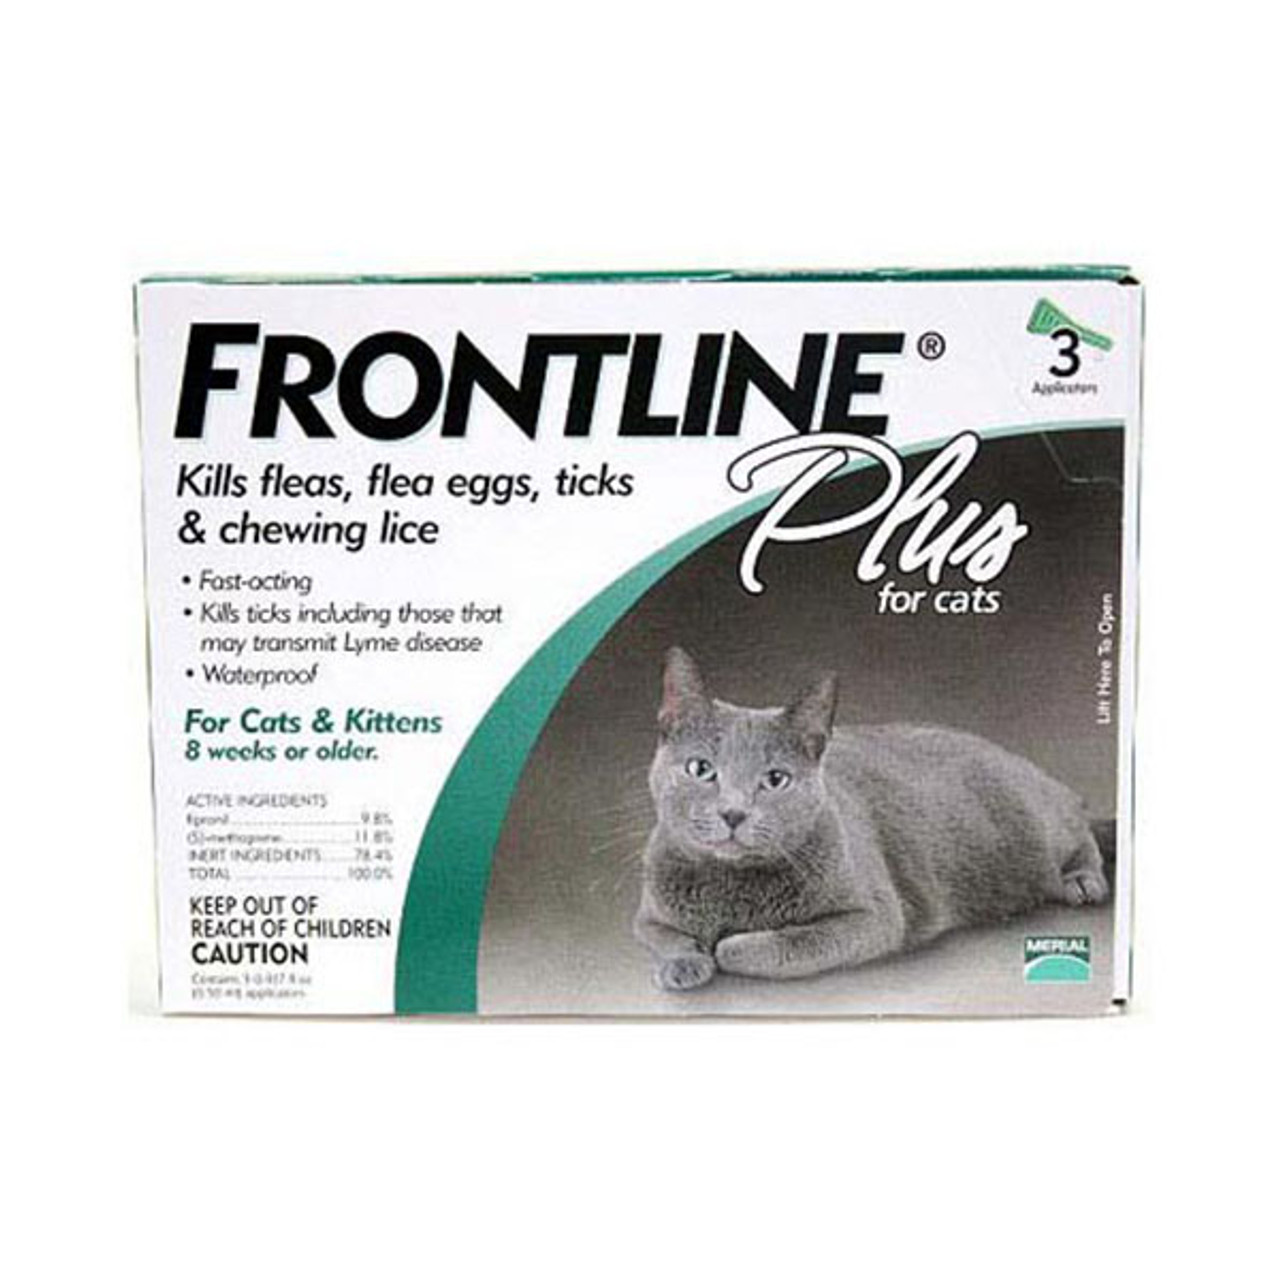 Frontline is a monthly application that kills 100% of fleas and their larvae within 24 to 48 hours.